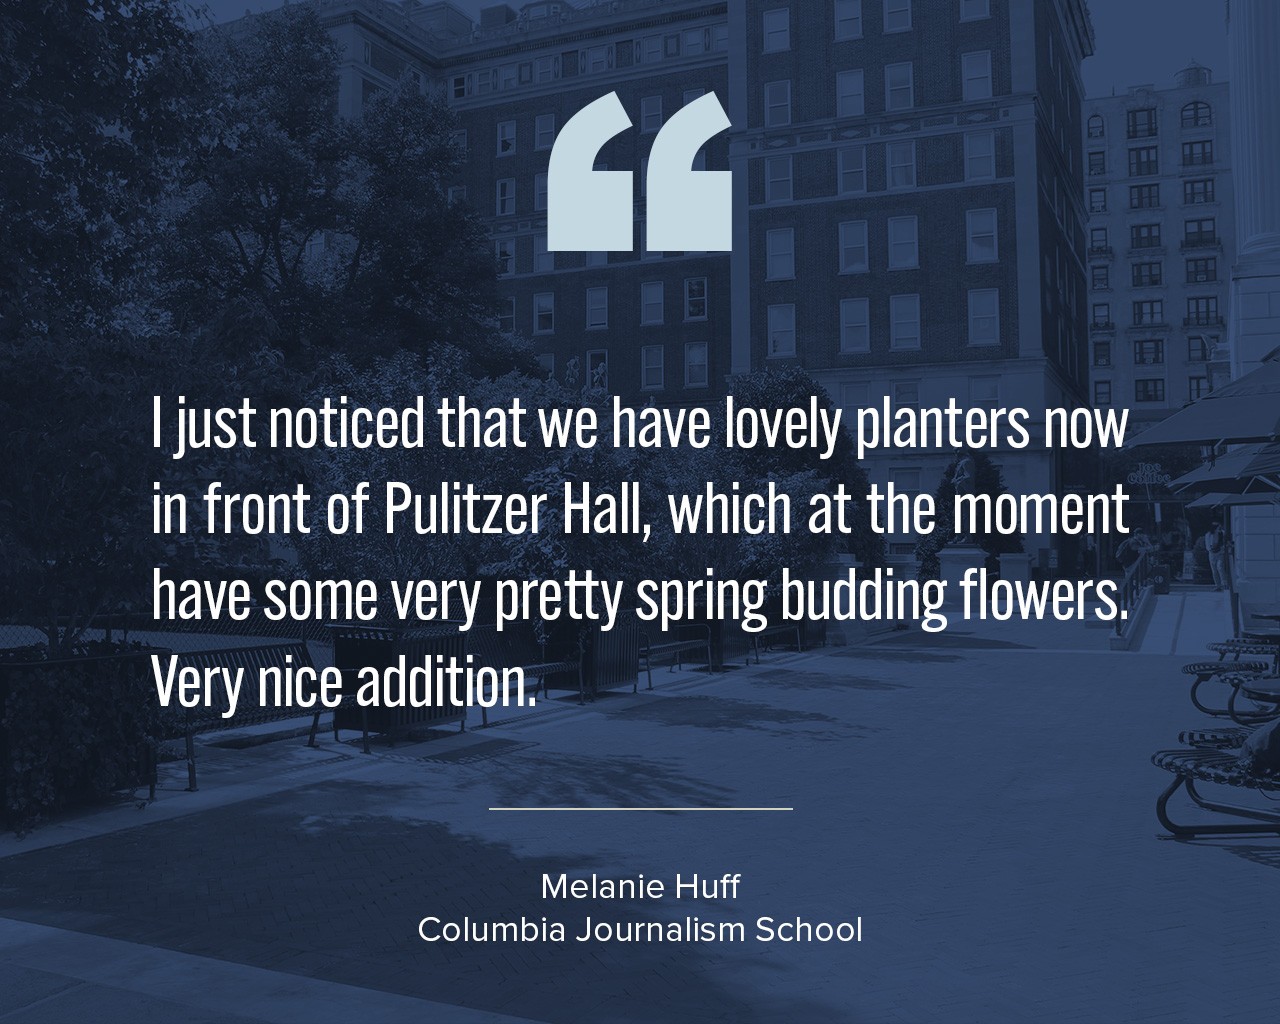 A quote against a blue background of Pulitzer Plaza that says, "I just noticed that we have lovely planters now in front of Pulitzer Hall, which at the moment have some very pretty spring budding flowers.  Very nice addition."